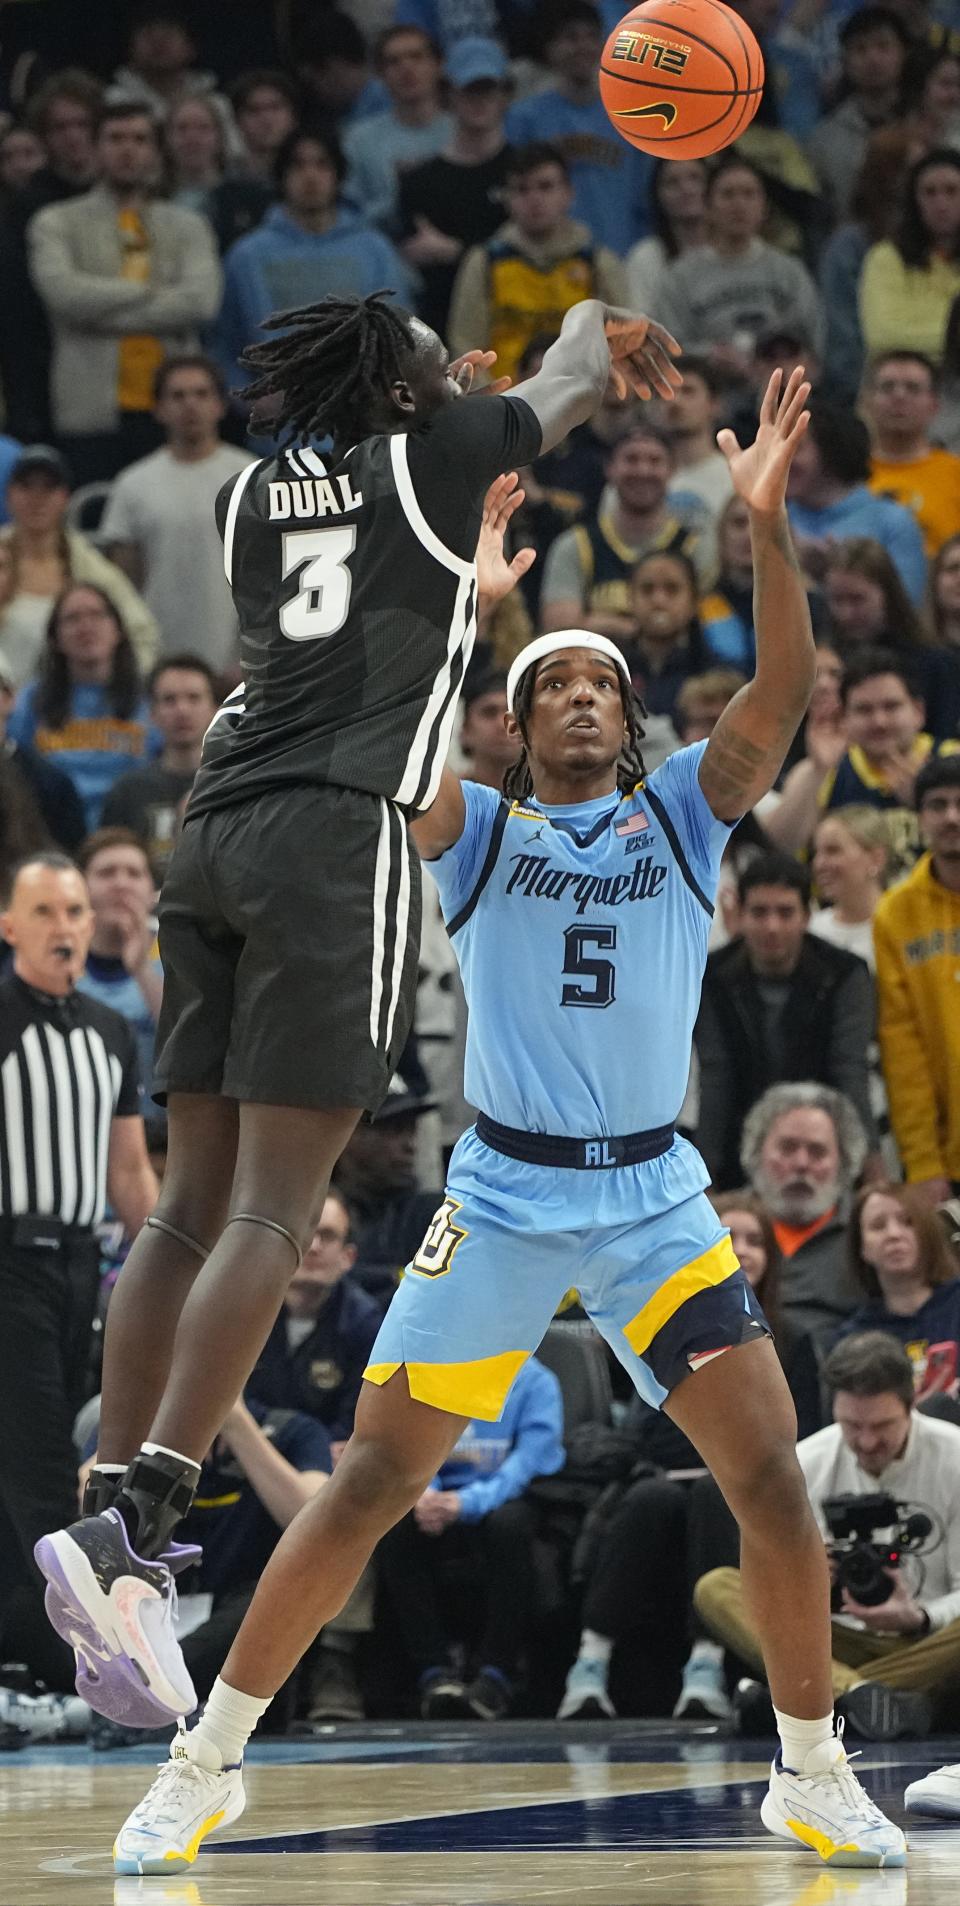 The Marquette coaches want Tre Norman to focus on playing defense and shooting when open.